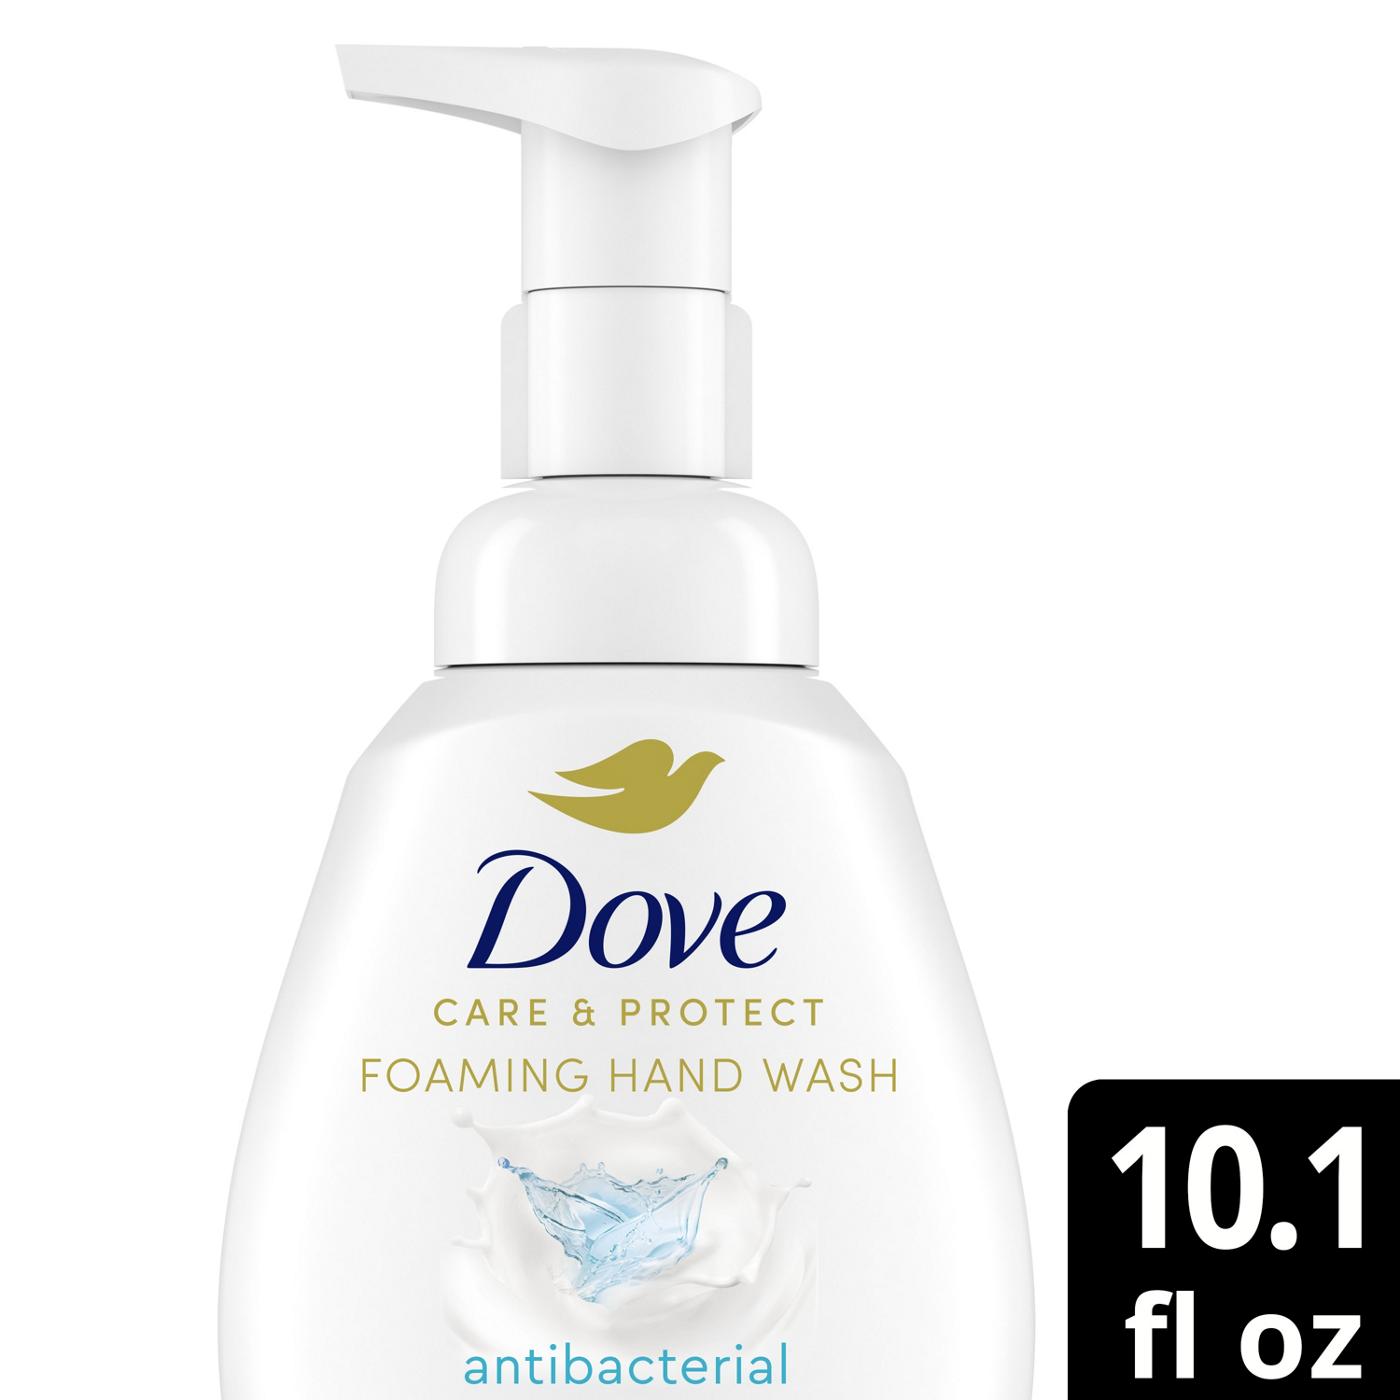 Dove Care & Protect Foaming Hand Wash; image 10 of 10